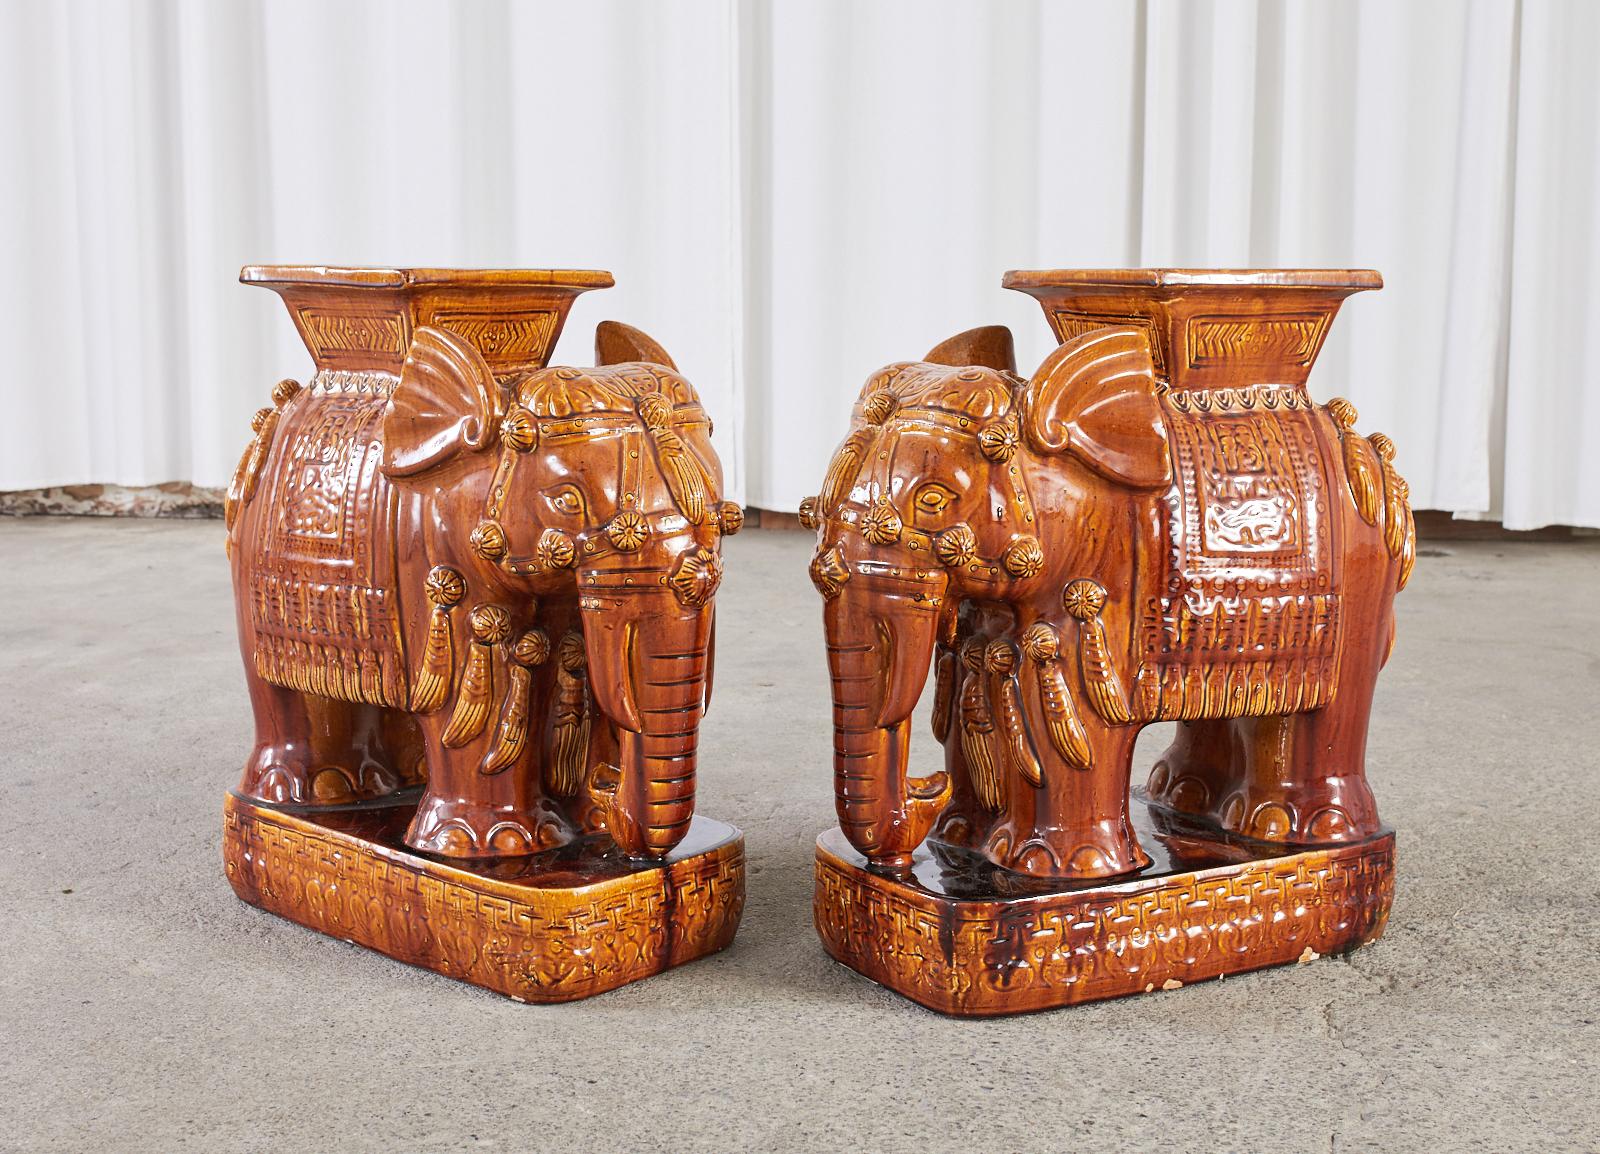 Charming pair of Chinese ceramic garden stool seats or drinks tables featuring a rich cognac glazed finish. Each elephant is depicted standing on an oval plinth with a caparisoned body. Beautifully crafted with an aged patina on the glaze having